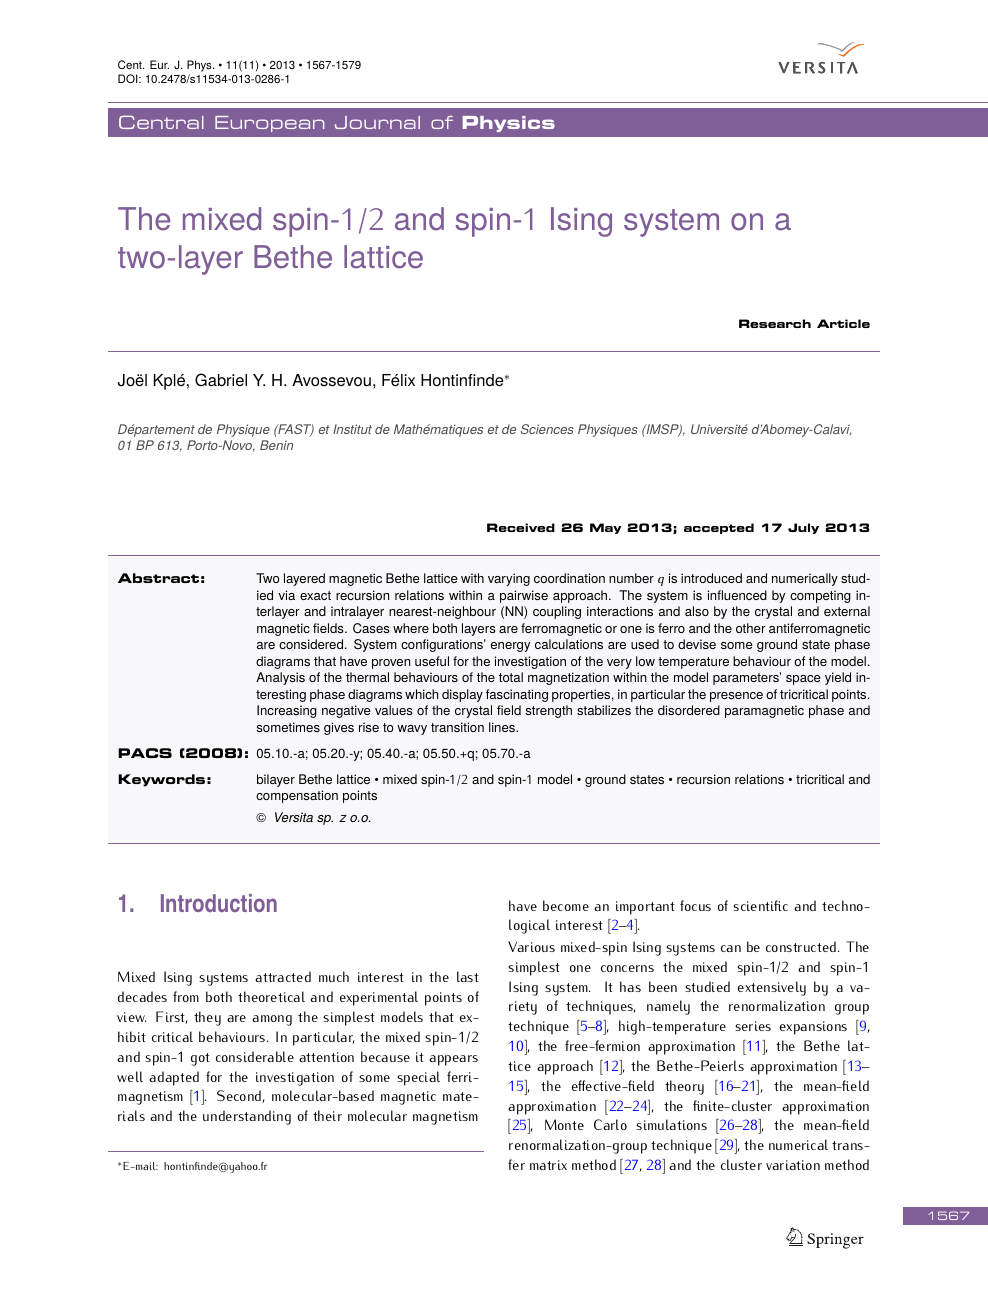 The Mixed Spin 1 2 And Spin 1 Ising System On A Two Layer Bethe Lattice Topic Of Research Paper In Physical Sciences Download Scholarly Article Pdf And Read For Free On Cyberleninka Open Science